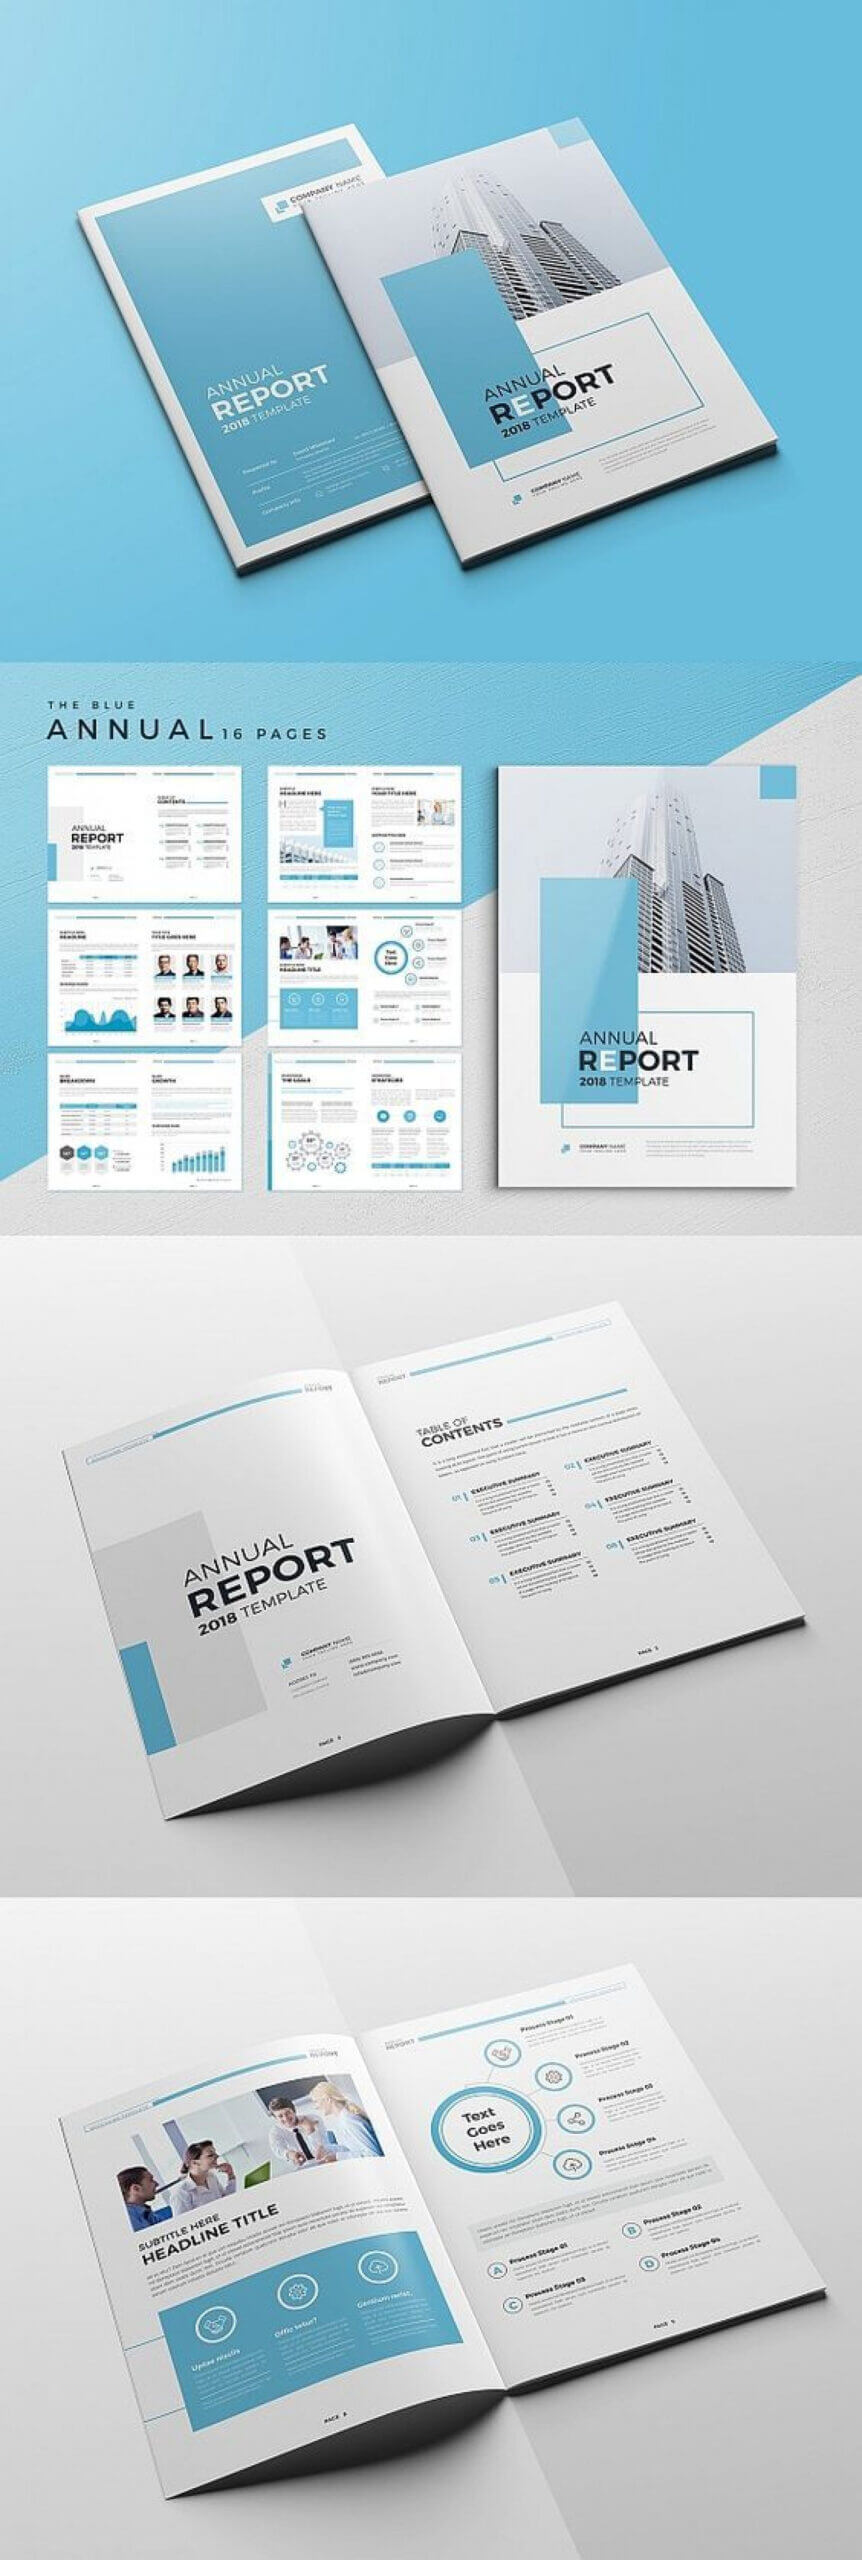 010 Creative Annual Report Template Word Marvelous Ideas Intended For Word Annual Report Template